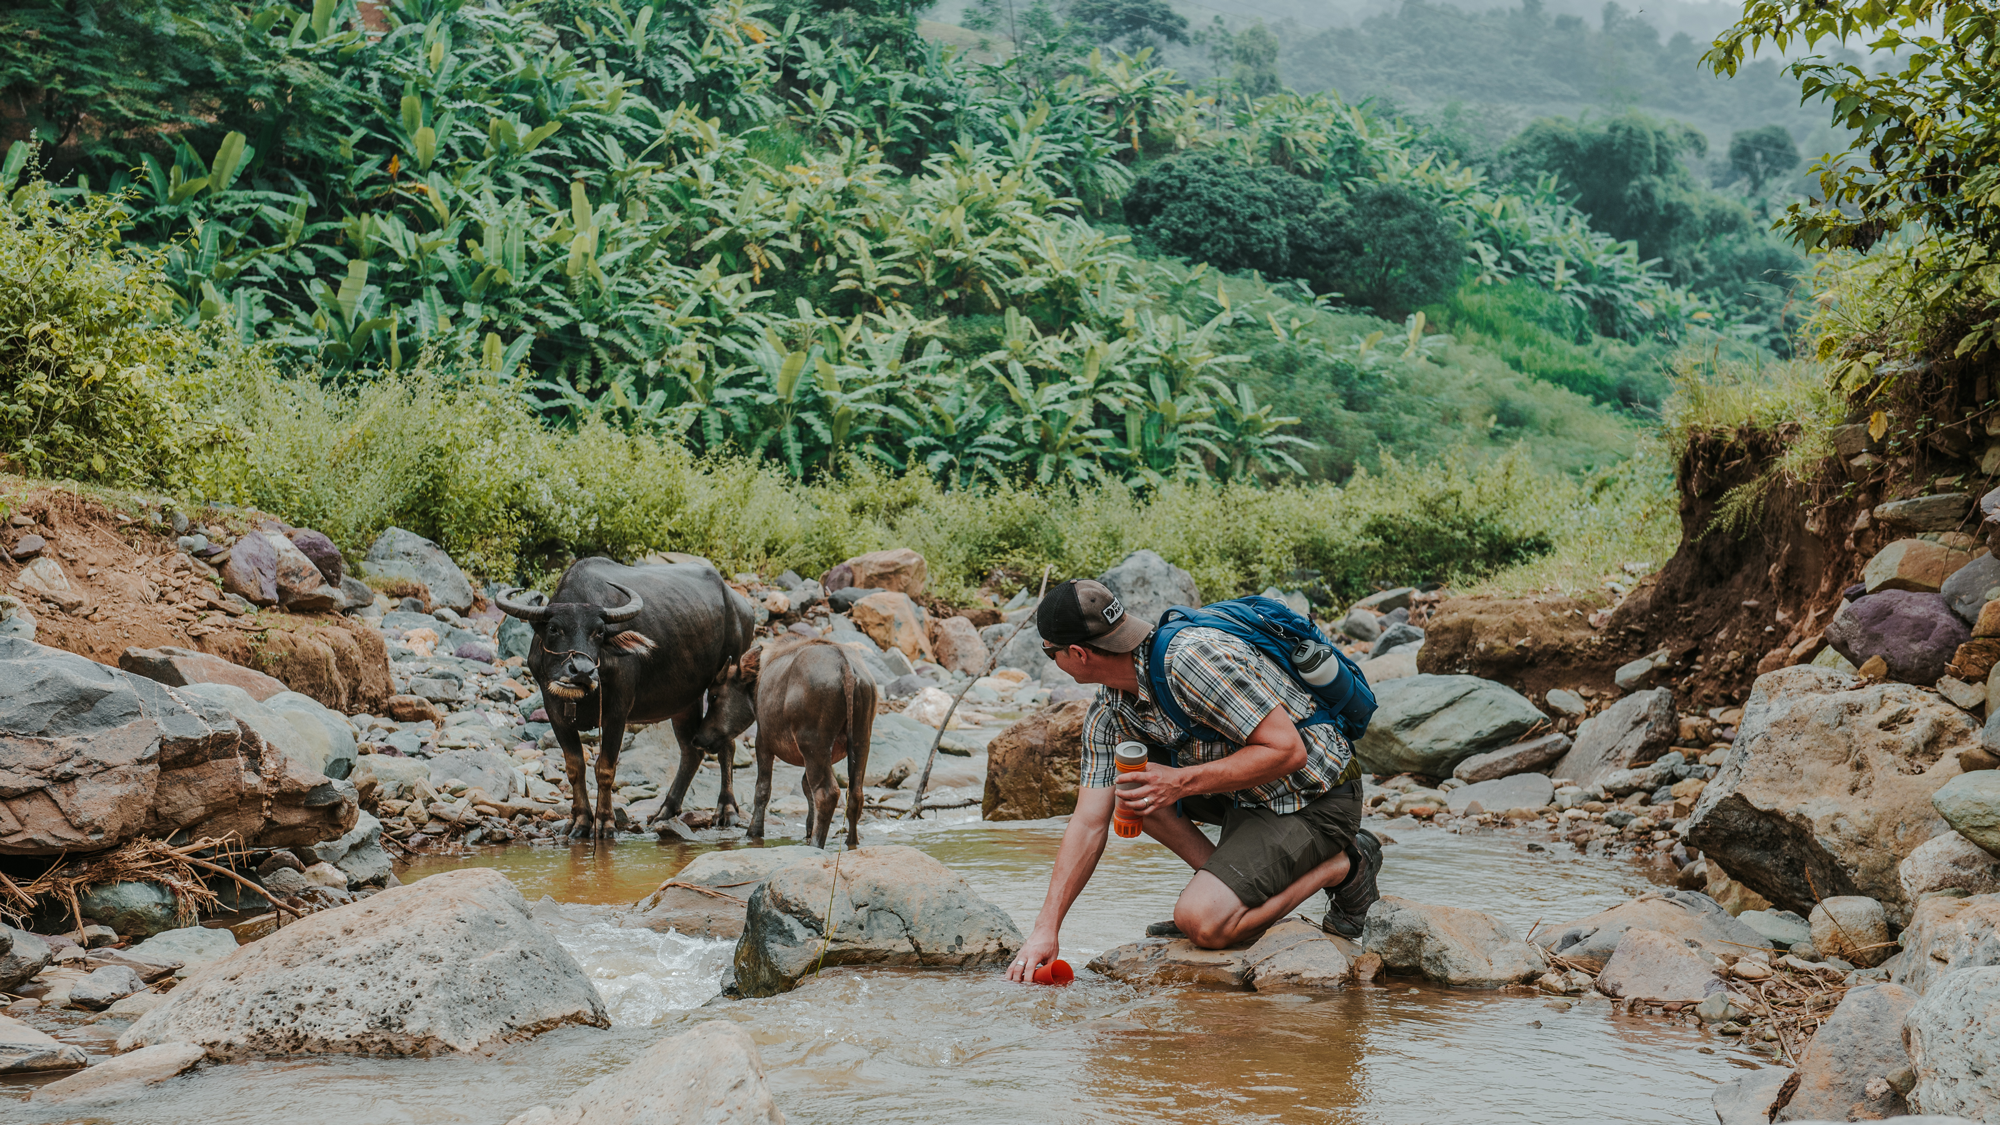 Travis Merrigan purifying water with his Grayl within close proximity of water buffalos in Vietnam.